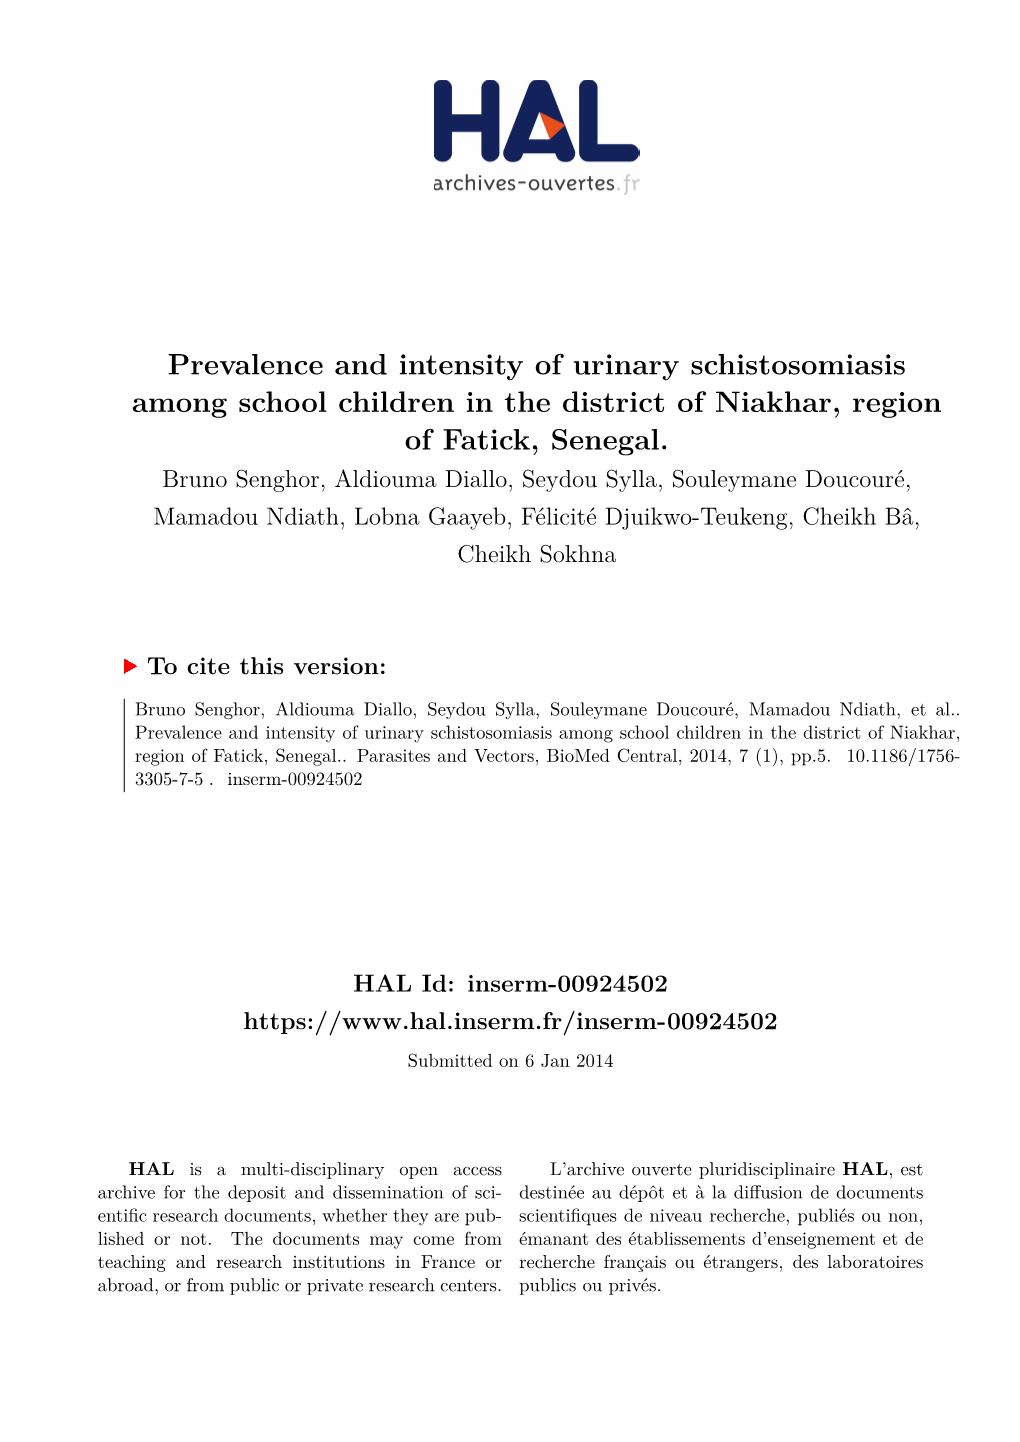 Prevalence and Intensity of Urinary Schistosomiasis Among School Children in the District of Niakhar, Region of Fatick, Senegal